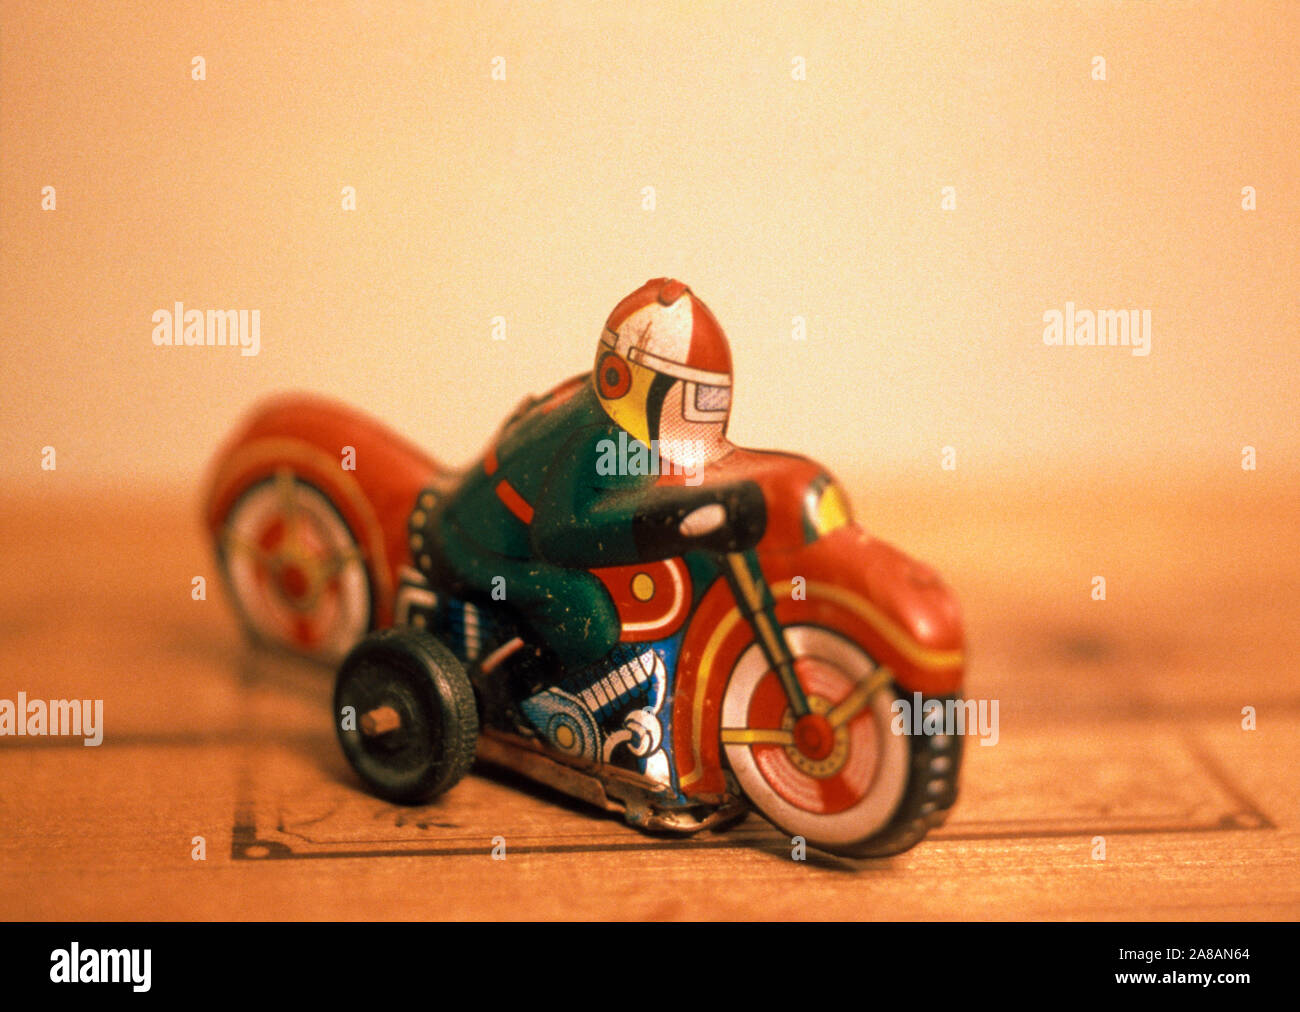 Close-up shot of toy motorcycle racer Stock Photo